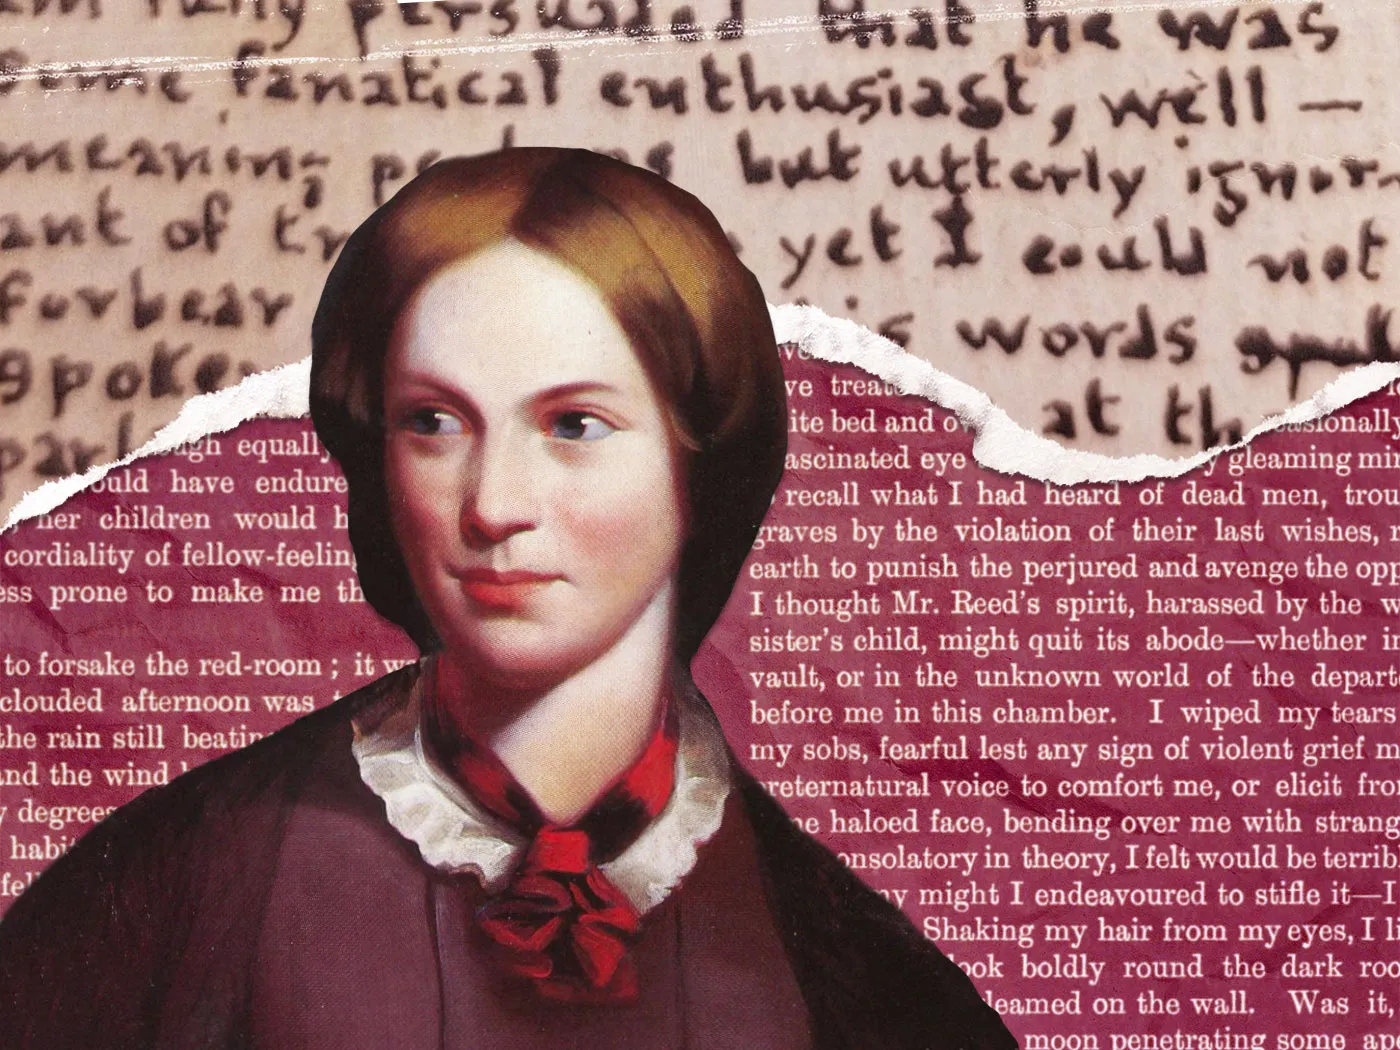 The Bronte Sisters - A True Likeness? - Photo of Charlotte Bronte